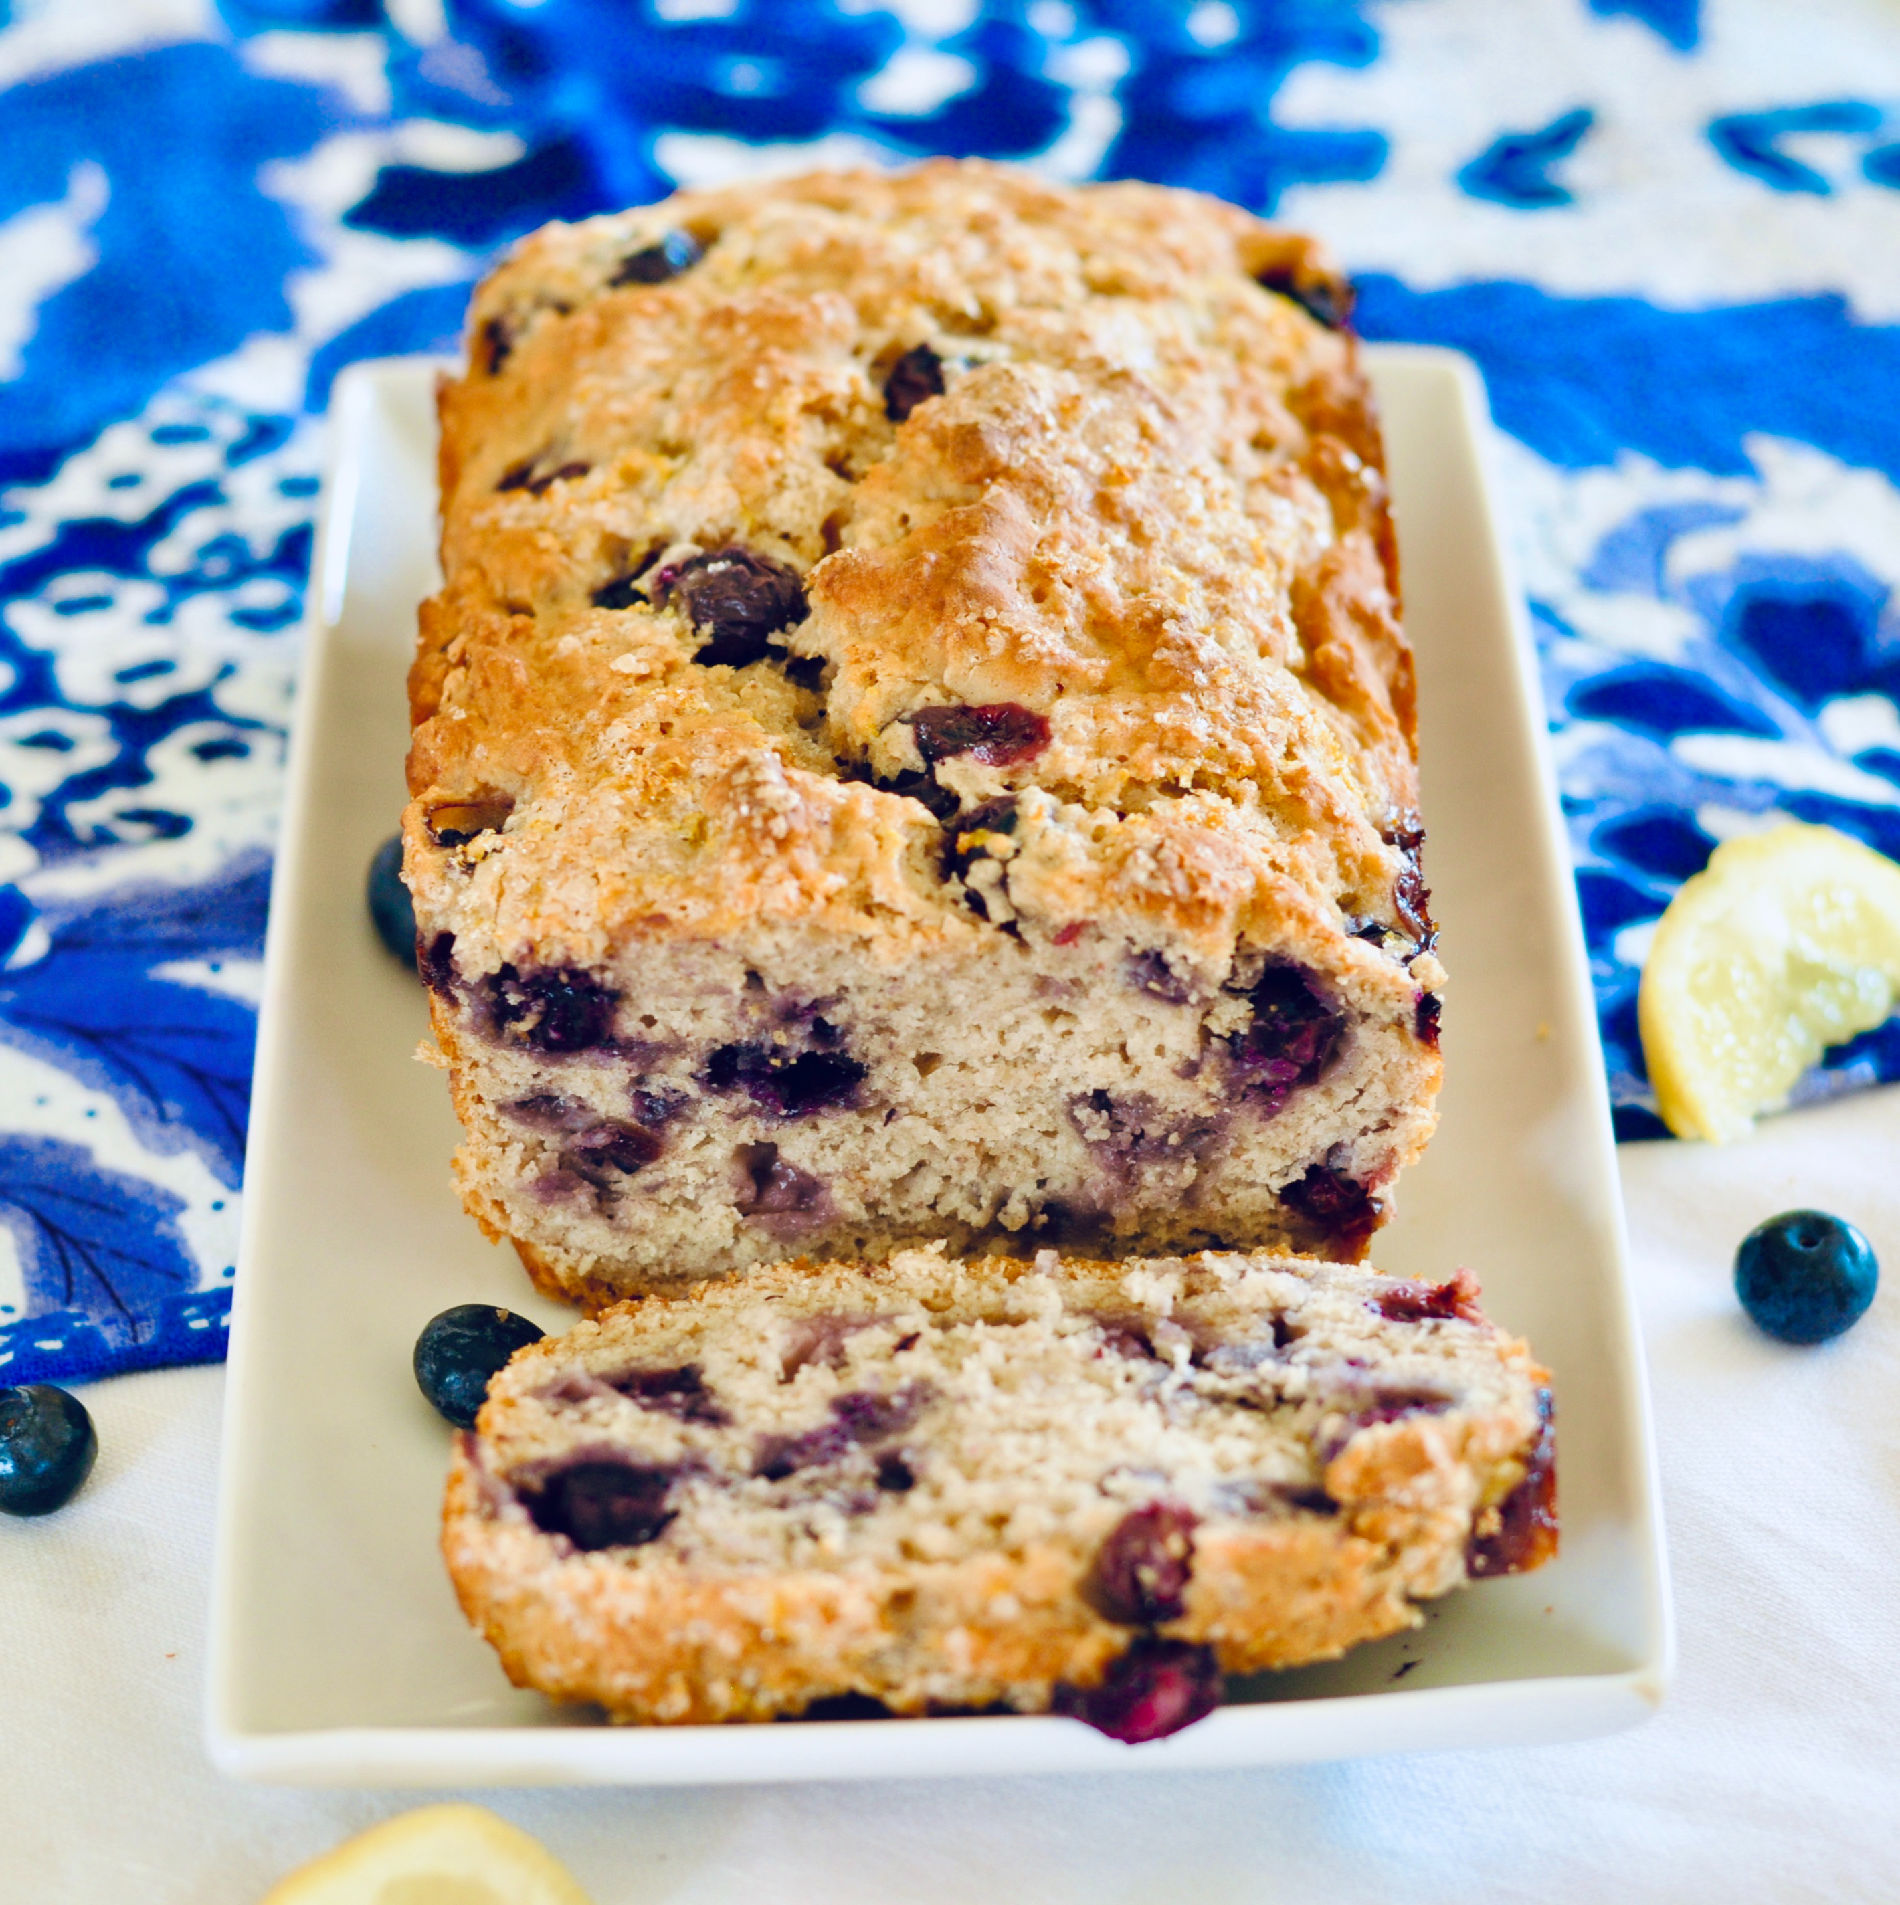 Easy Blueberry Banana Bread Recipe with Cinnamon | Cravings Journal